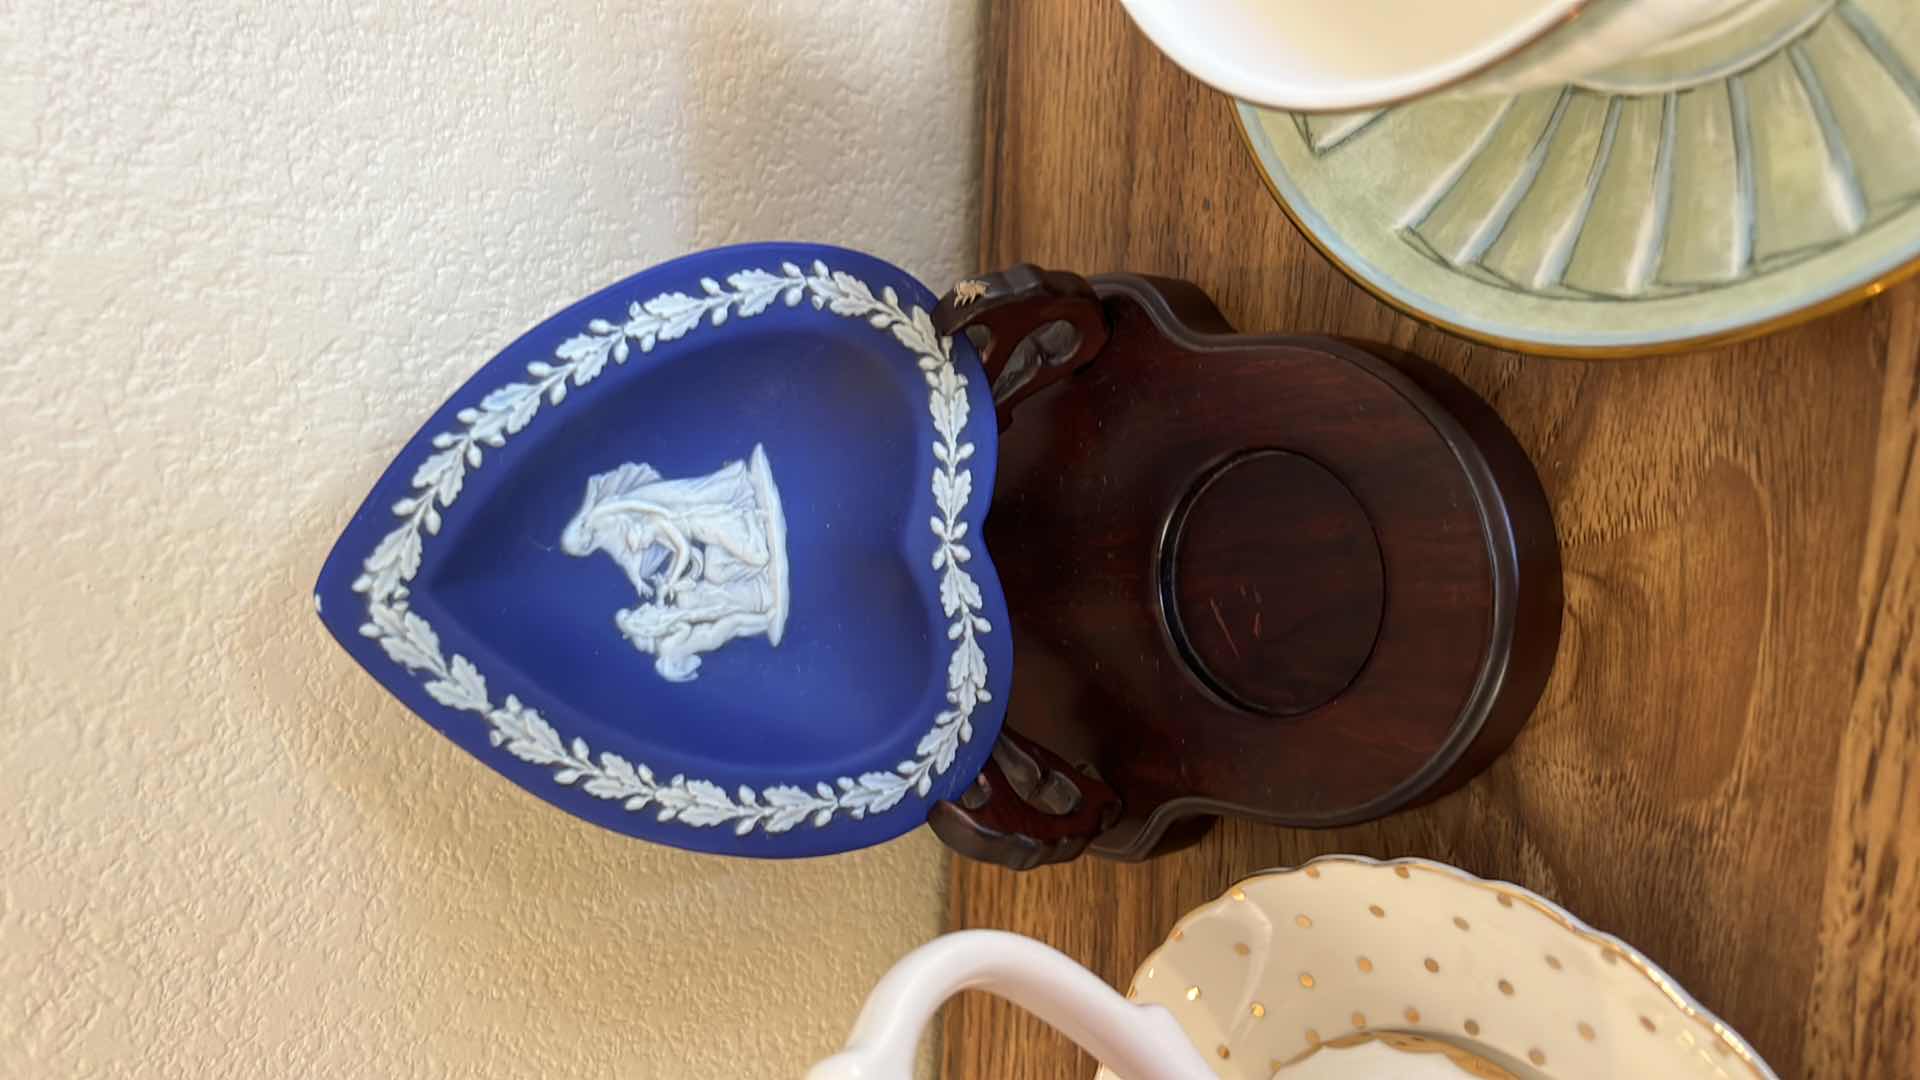 Photo 6 of 3 TEACUPS AND SAUCER SETS, BLUE HEART ON WOOD STAND